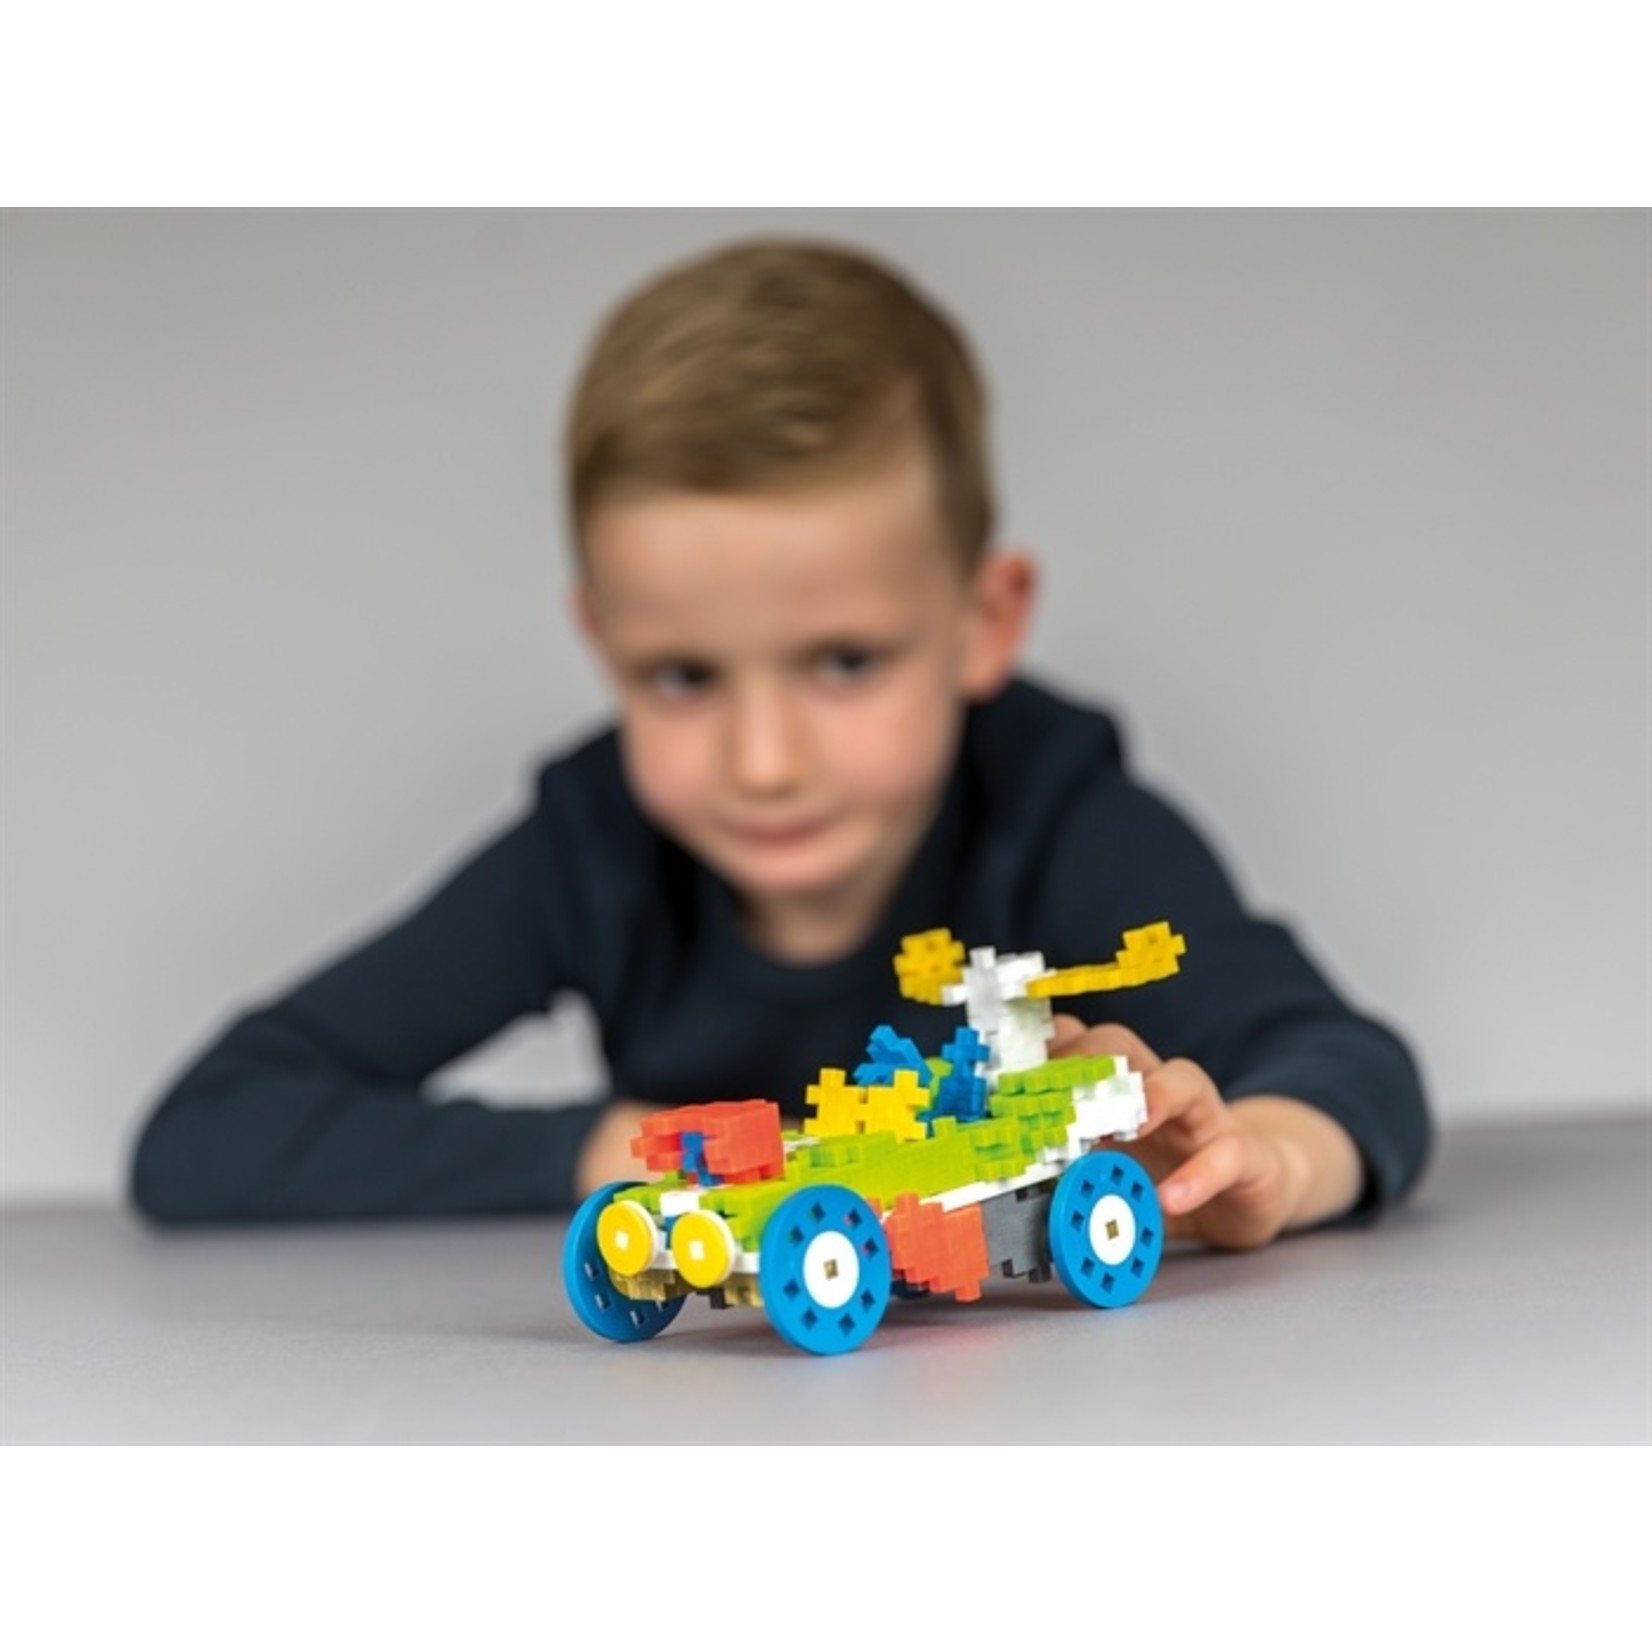 Plus-Plus Learn to Build Vehicles